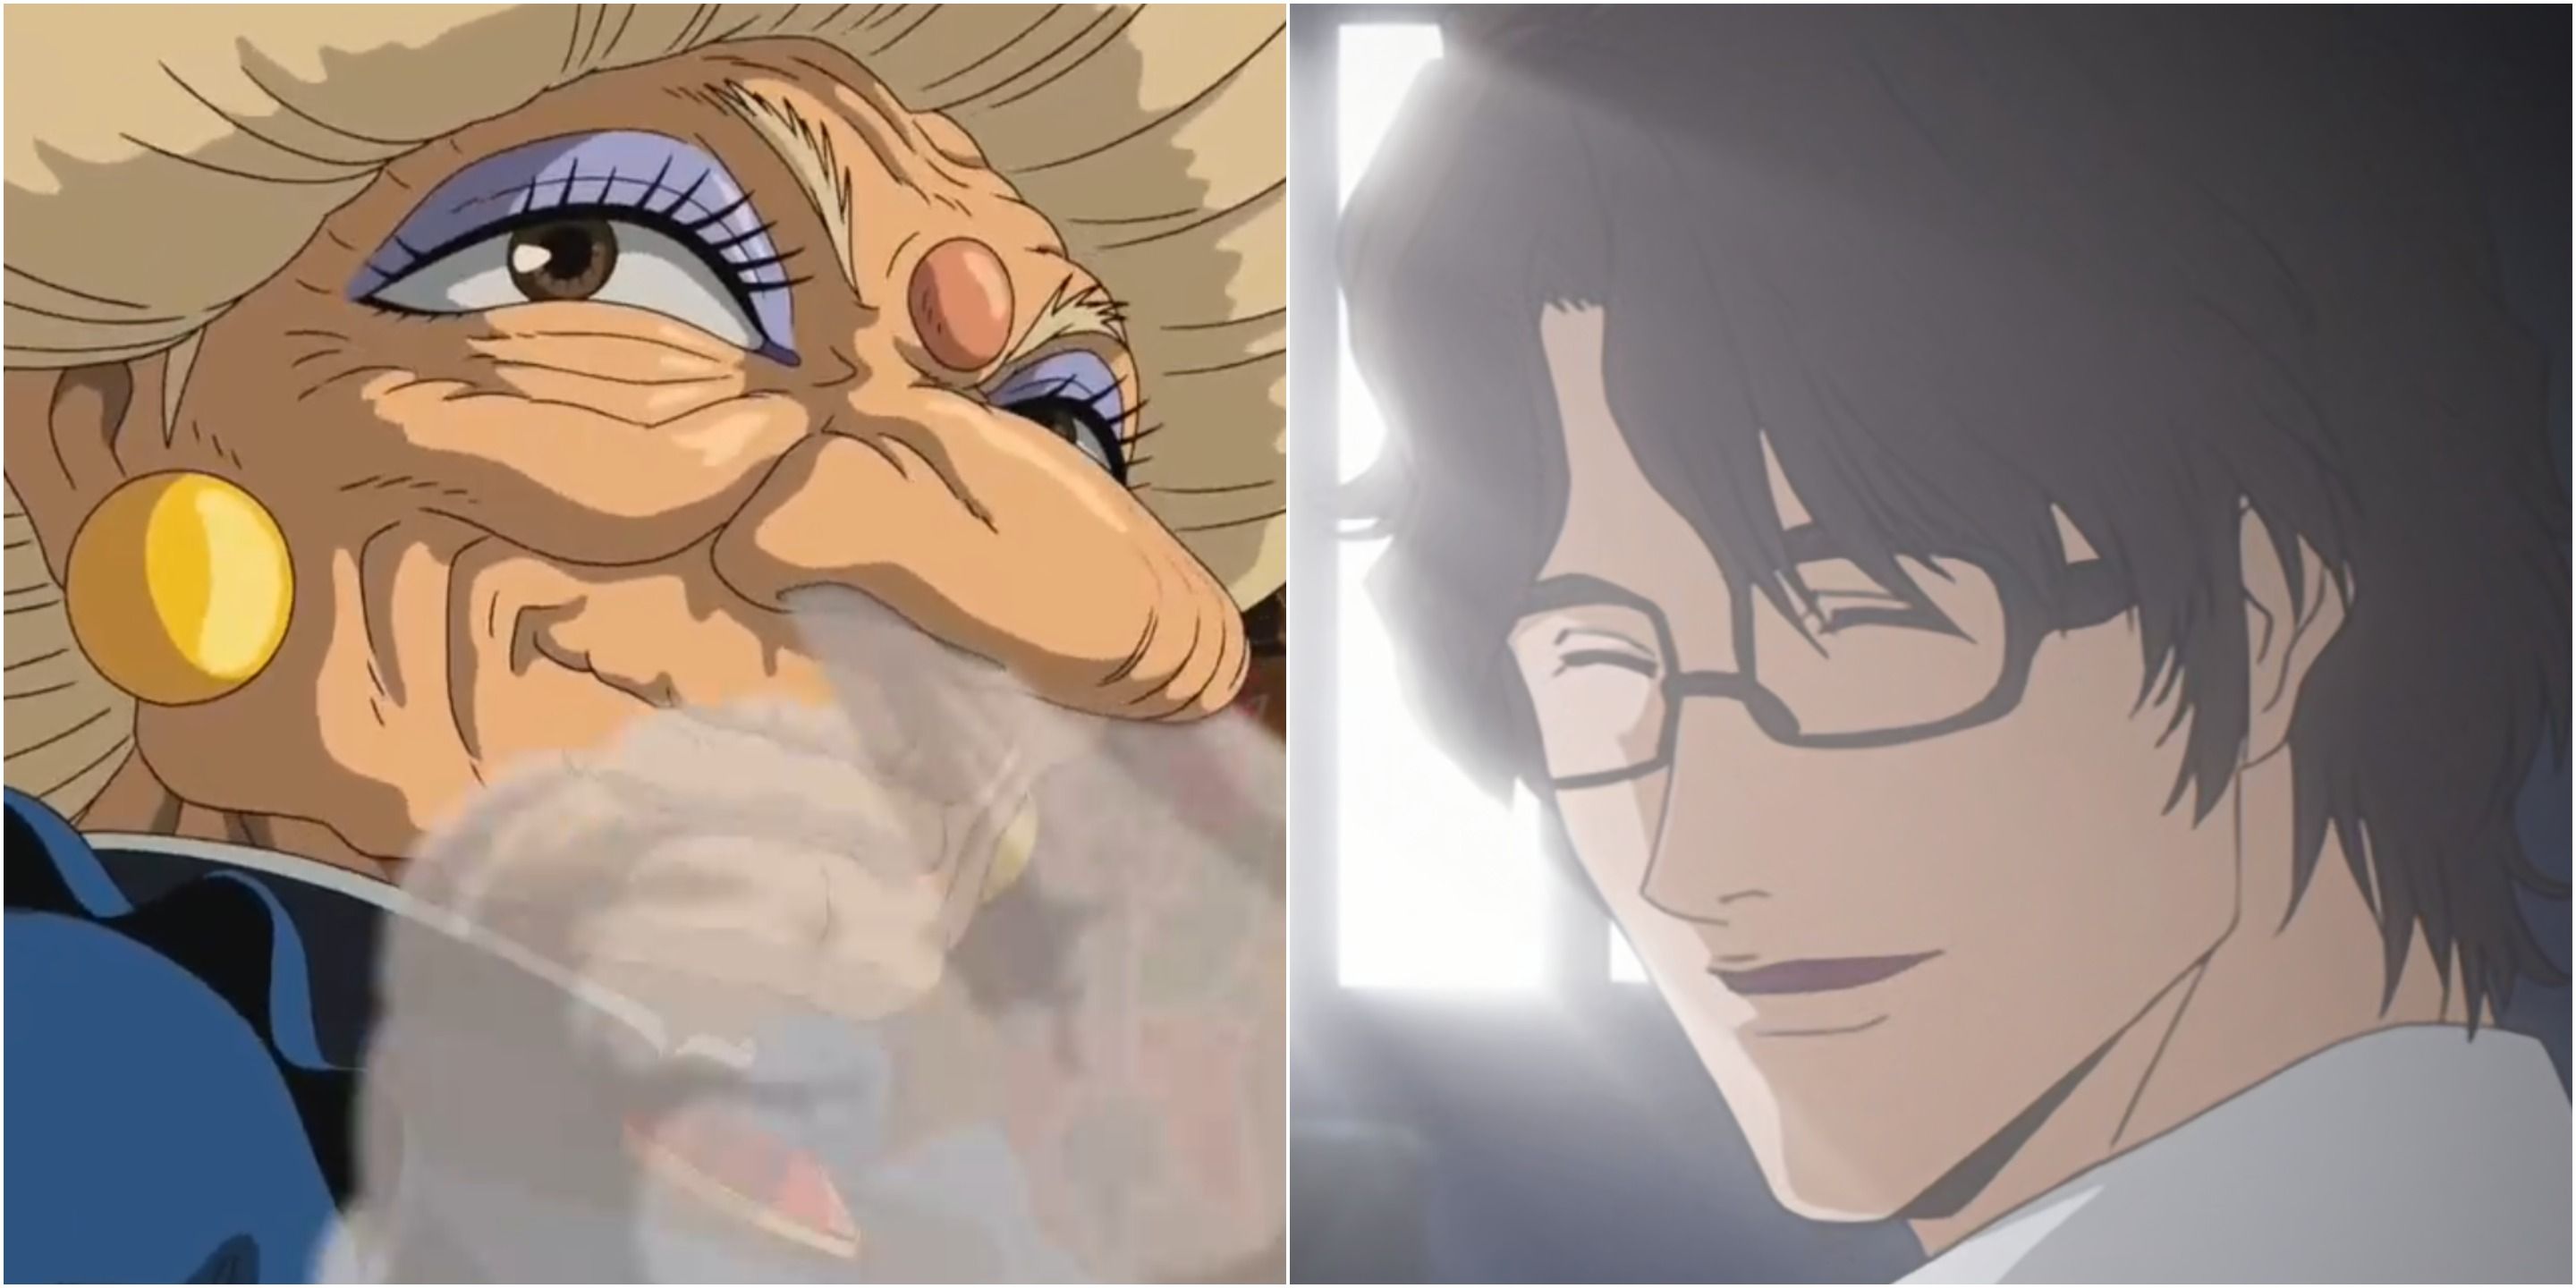 Yubaba From Spirited Away and Aizen Sosuke from Bleach Could be Allies